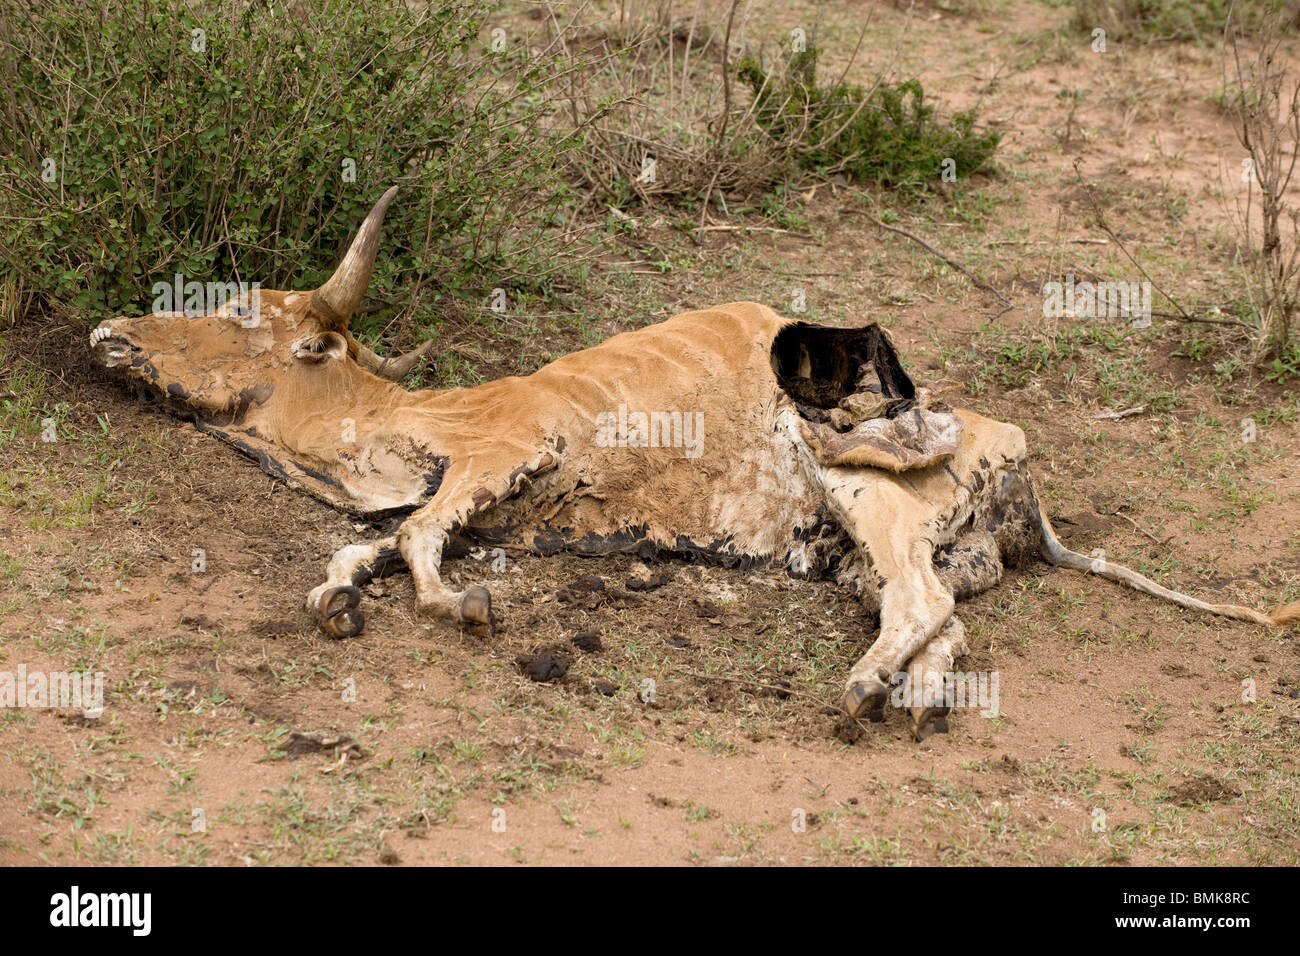 Dead cow on the ground, Tanzania, Africa Stock Photo